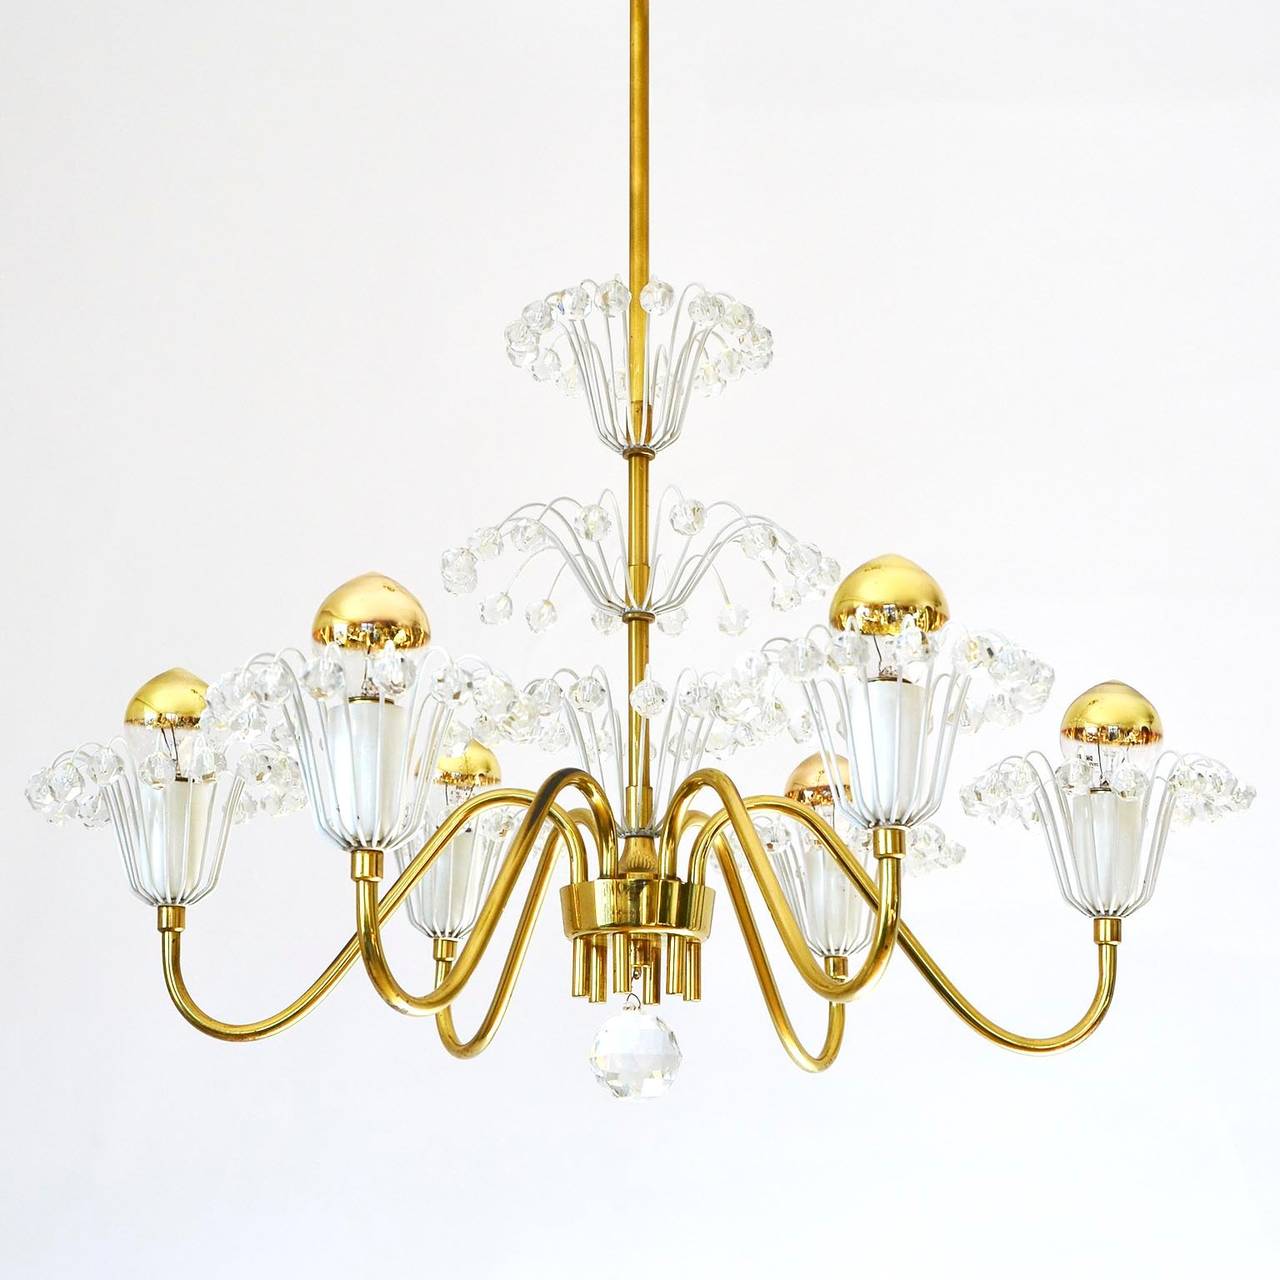 A very nice Viennese chandelier by Emil Stejnar for Rupert Nikoll, Austria, manufactured in midcentury, circa 1950.
It is made of brass, white lacquered metal and hand cut crystal glass. 
The light is in excellent condition. It has six sockets for